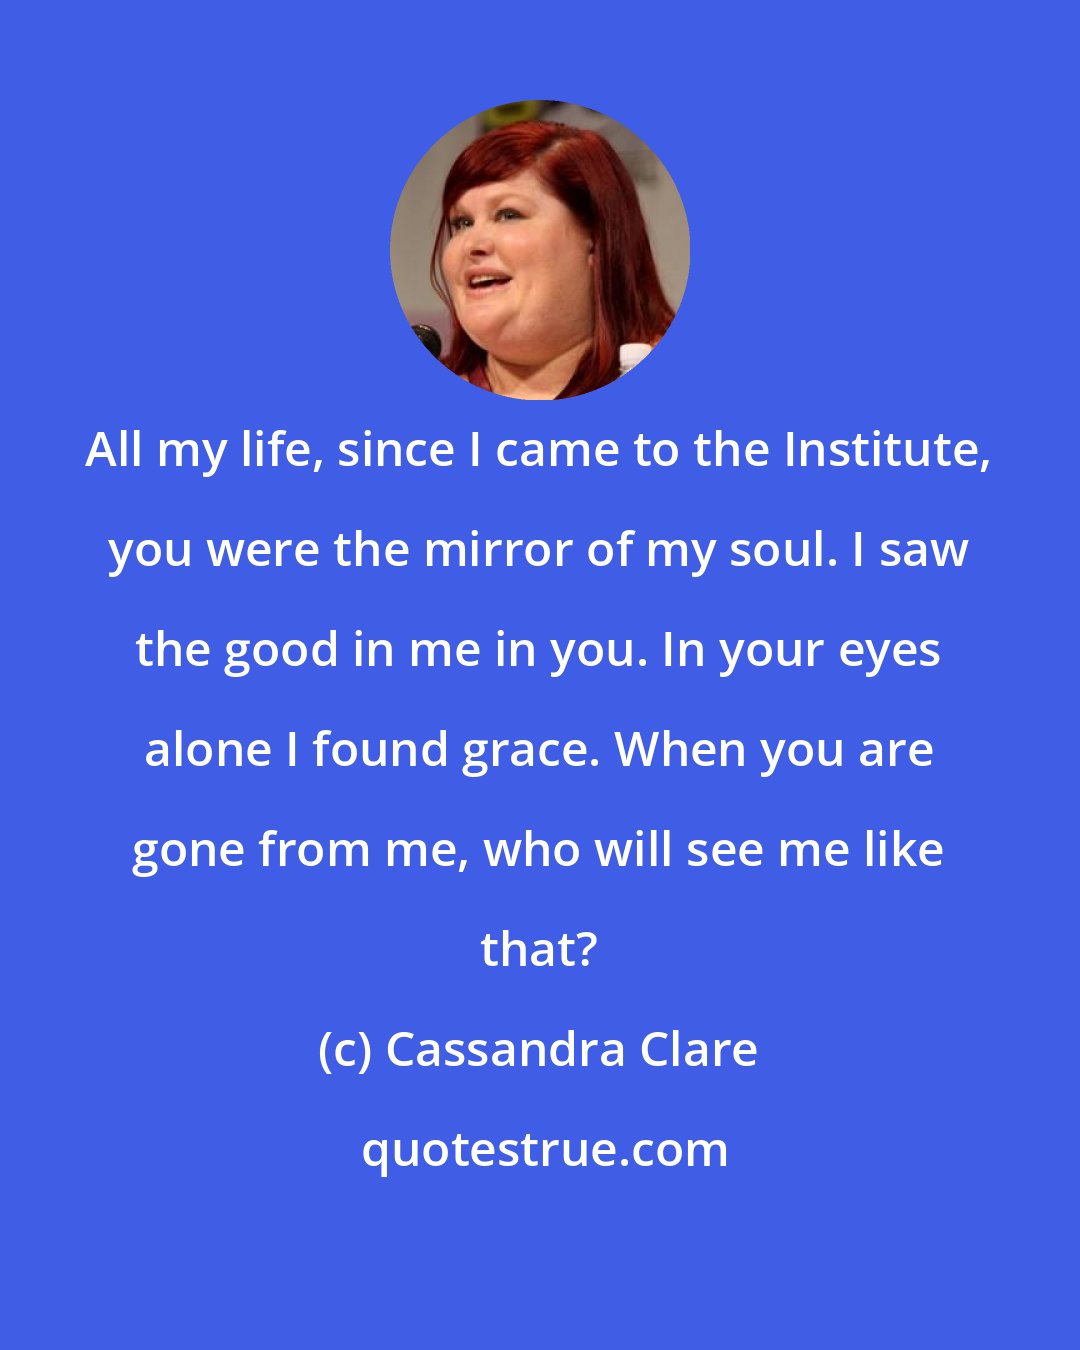 Cassandra Clare: All my life, since I came to the Institute, you were the mirror of my soul. I saw the good in me in you. In your eyes alone I found grace. When you are gone from me, who will see me like that?